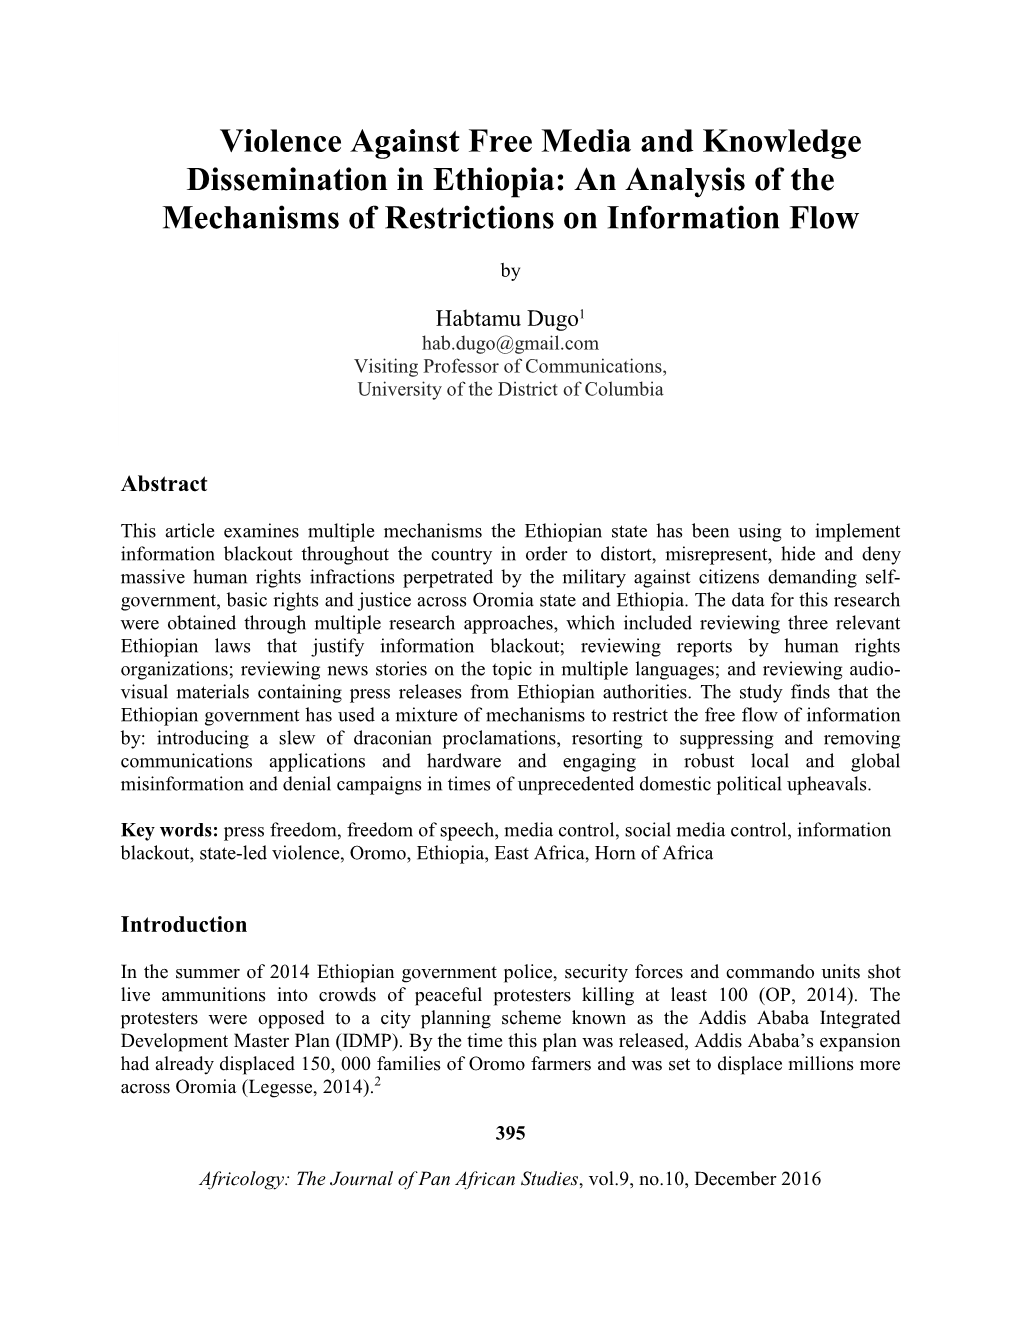 Violence Against Free Media and Knowledge Dissemination in Ethiopia: an Analysis of the Mechanisms of Restrictions on Information Flow